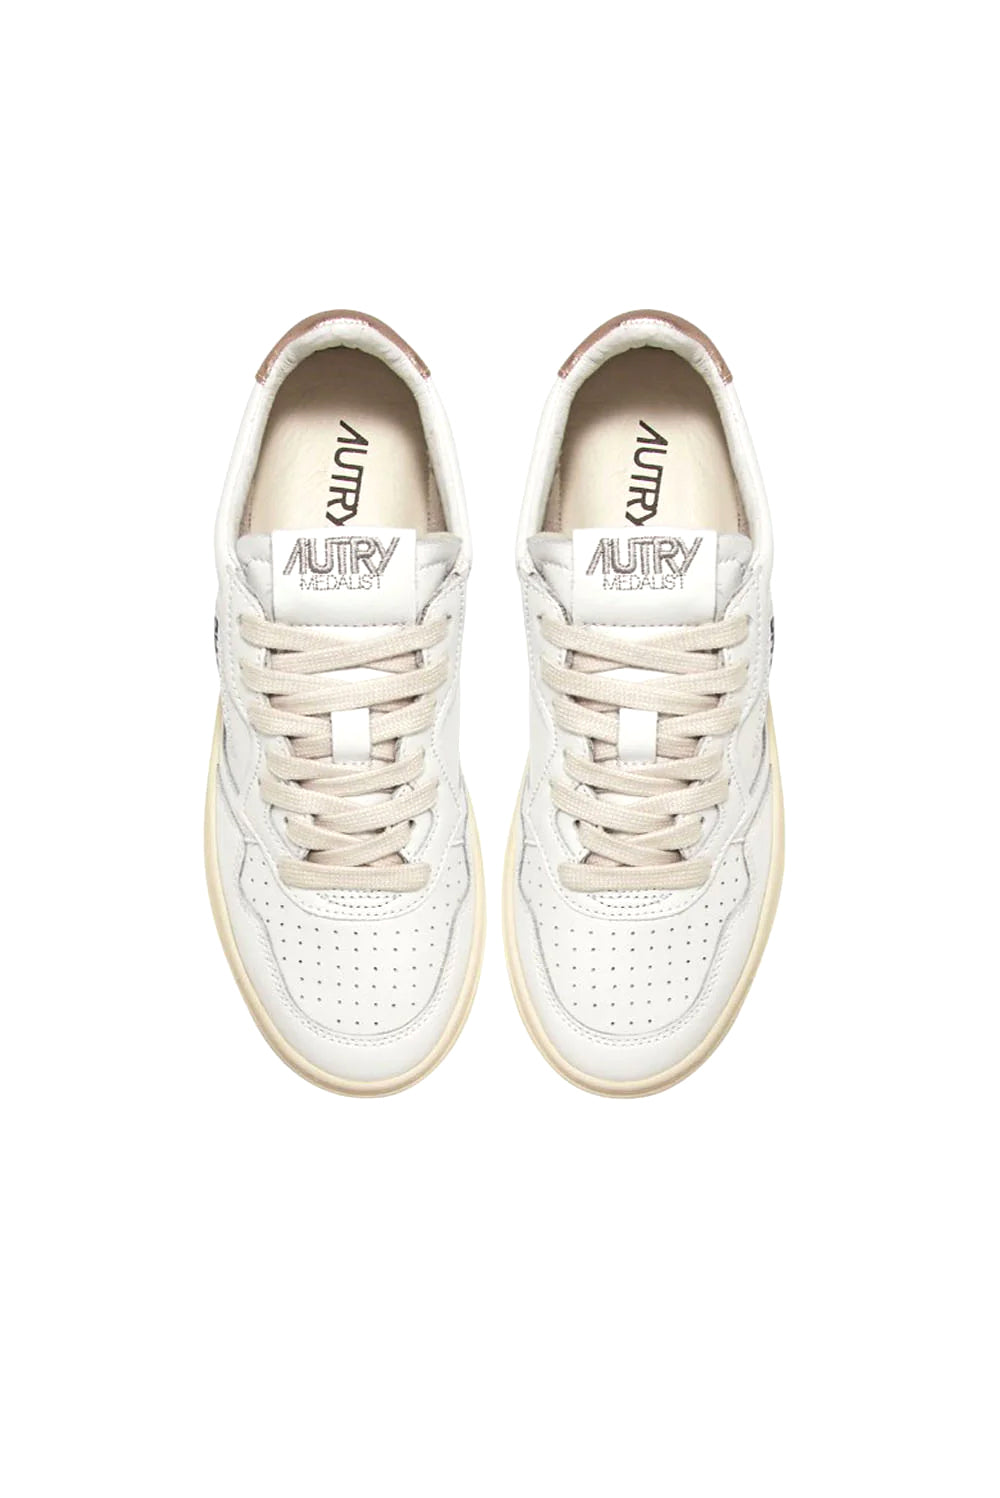  Autry Sneakers Medalist Low Woman - 4